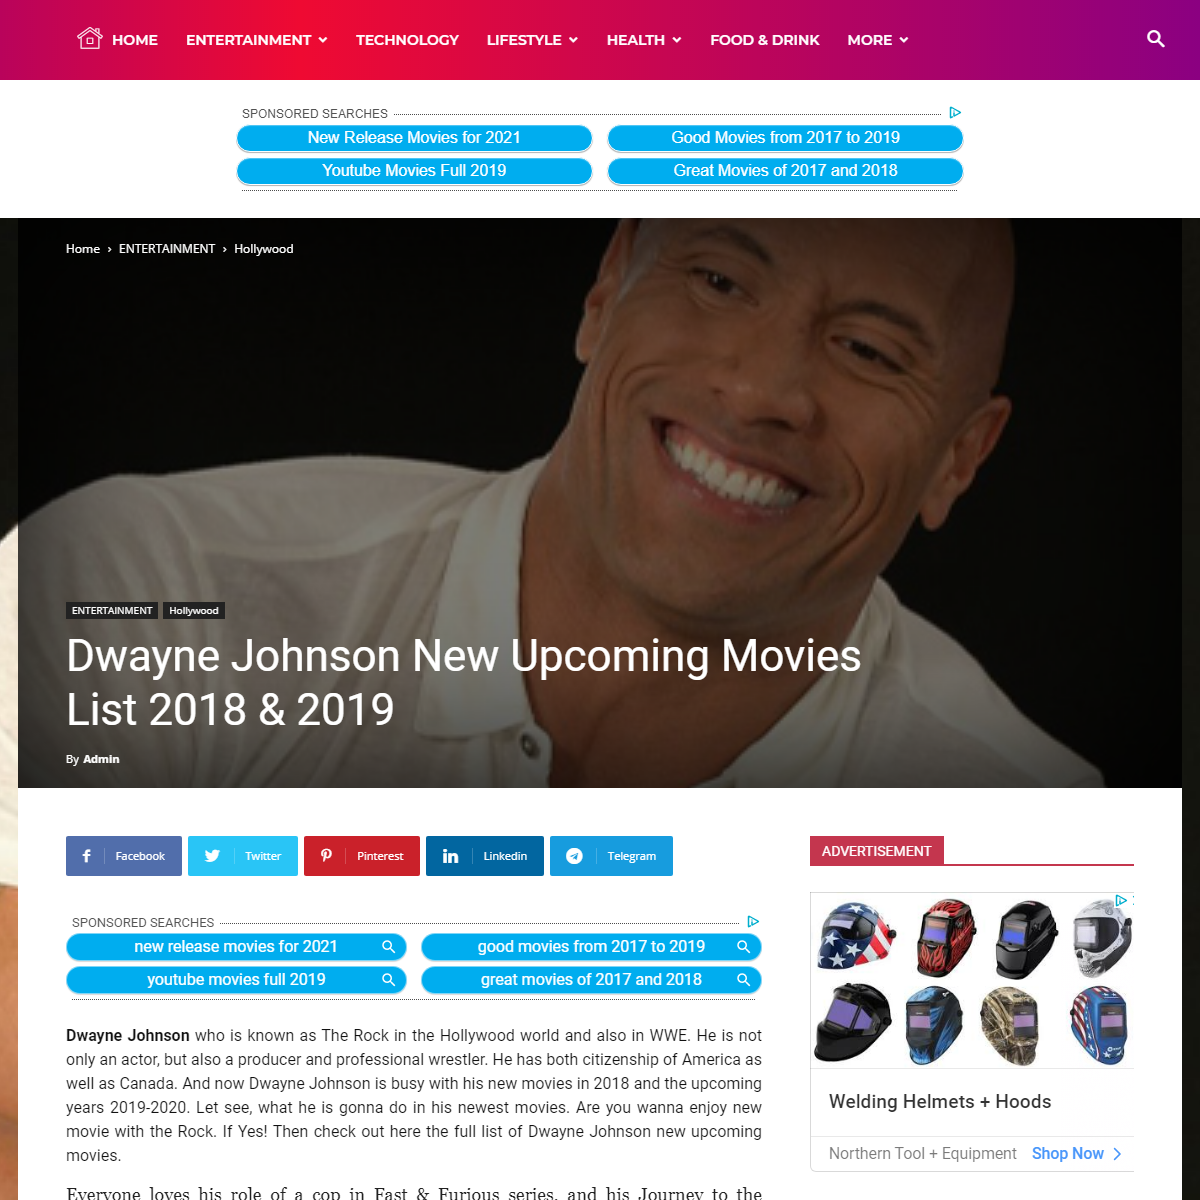 A complete backup of http://ehotbuzz.com/entertainment/hollywood/dwayne-johnson-new-movies/